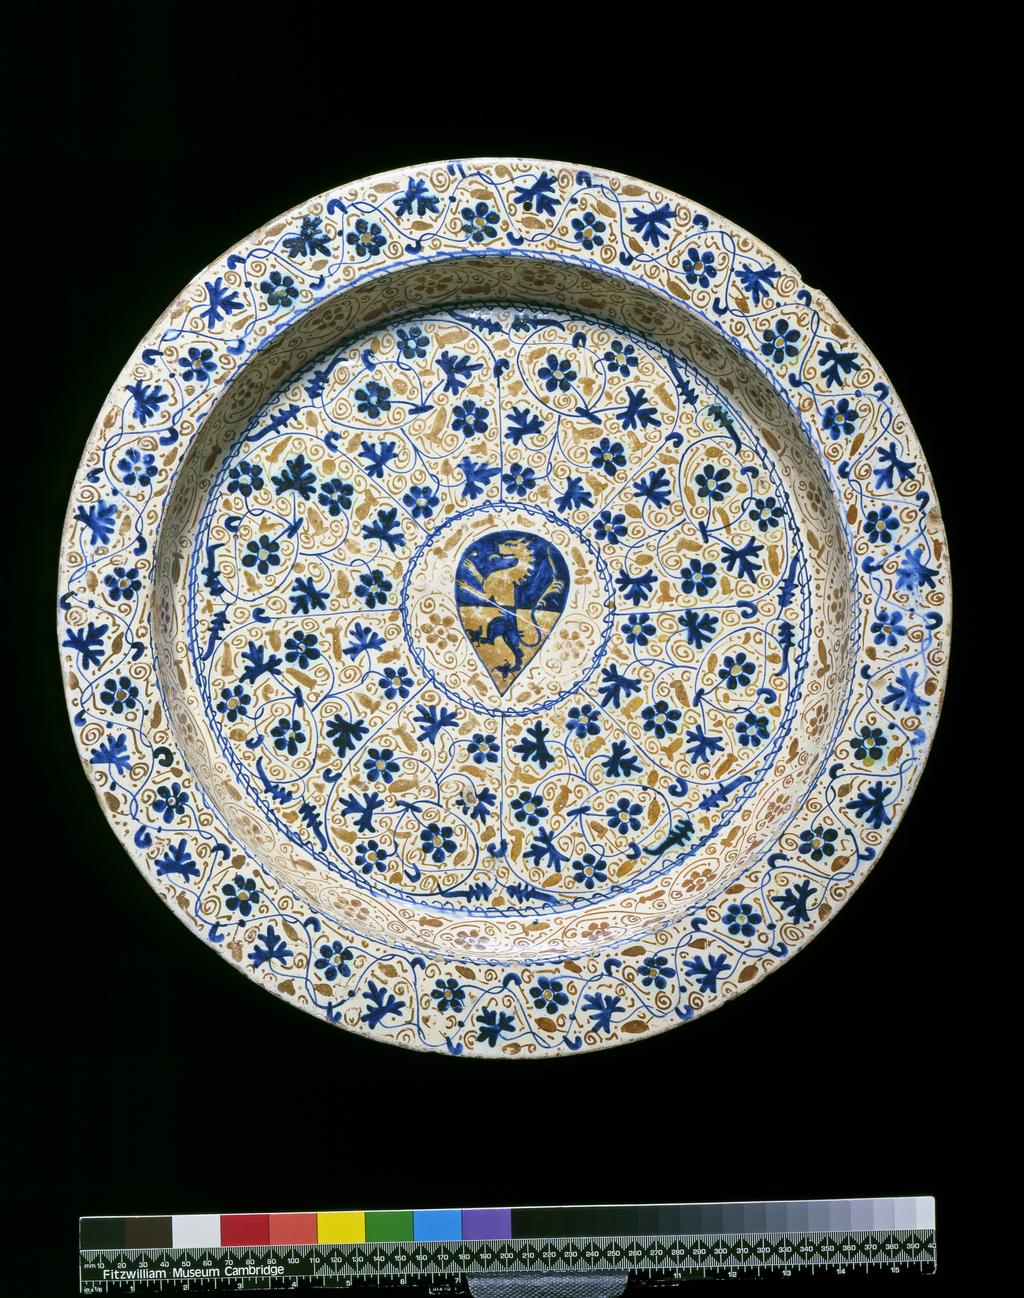 An image of Dish, BasinTin-glazed earthenware painted in cobalt-blue and copper lustreEarthenware, tin-glazed, and painted in cobalt-blue and copper lustre. Circular with flat rim, vertical sides, and flat central area. In the centre there is a heater-shaped shield bearing the arms per fesse azure and or a lion rampant countercharged within a blue spirally-entwined circle, from which eight curling sprays of bryony flowers and parsley-like leaves radiate towards another spirally entwined circle. The sides are decorated in lustre only, and the rim in blue and lustre with scrolling and wavying sprays of similar flowers and leaves. The back is decorated in lustre only with a central six-petalled flower surrounded by circlets and dotsSpanishC.1450-75